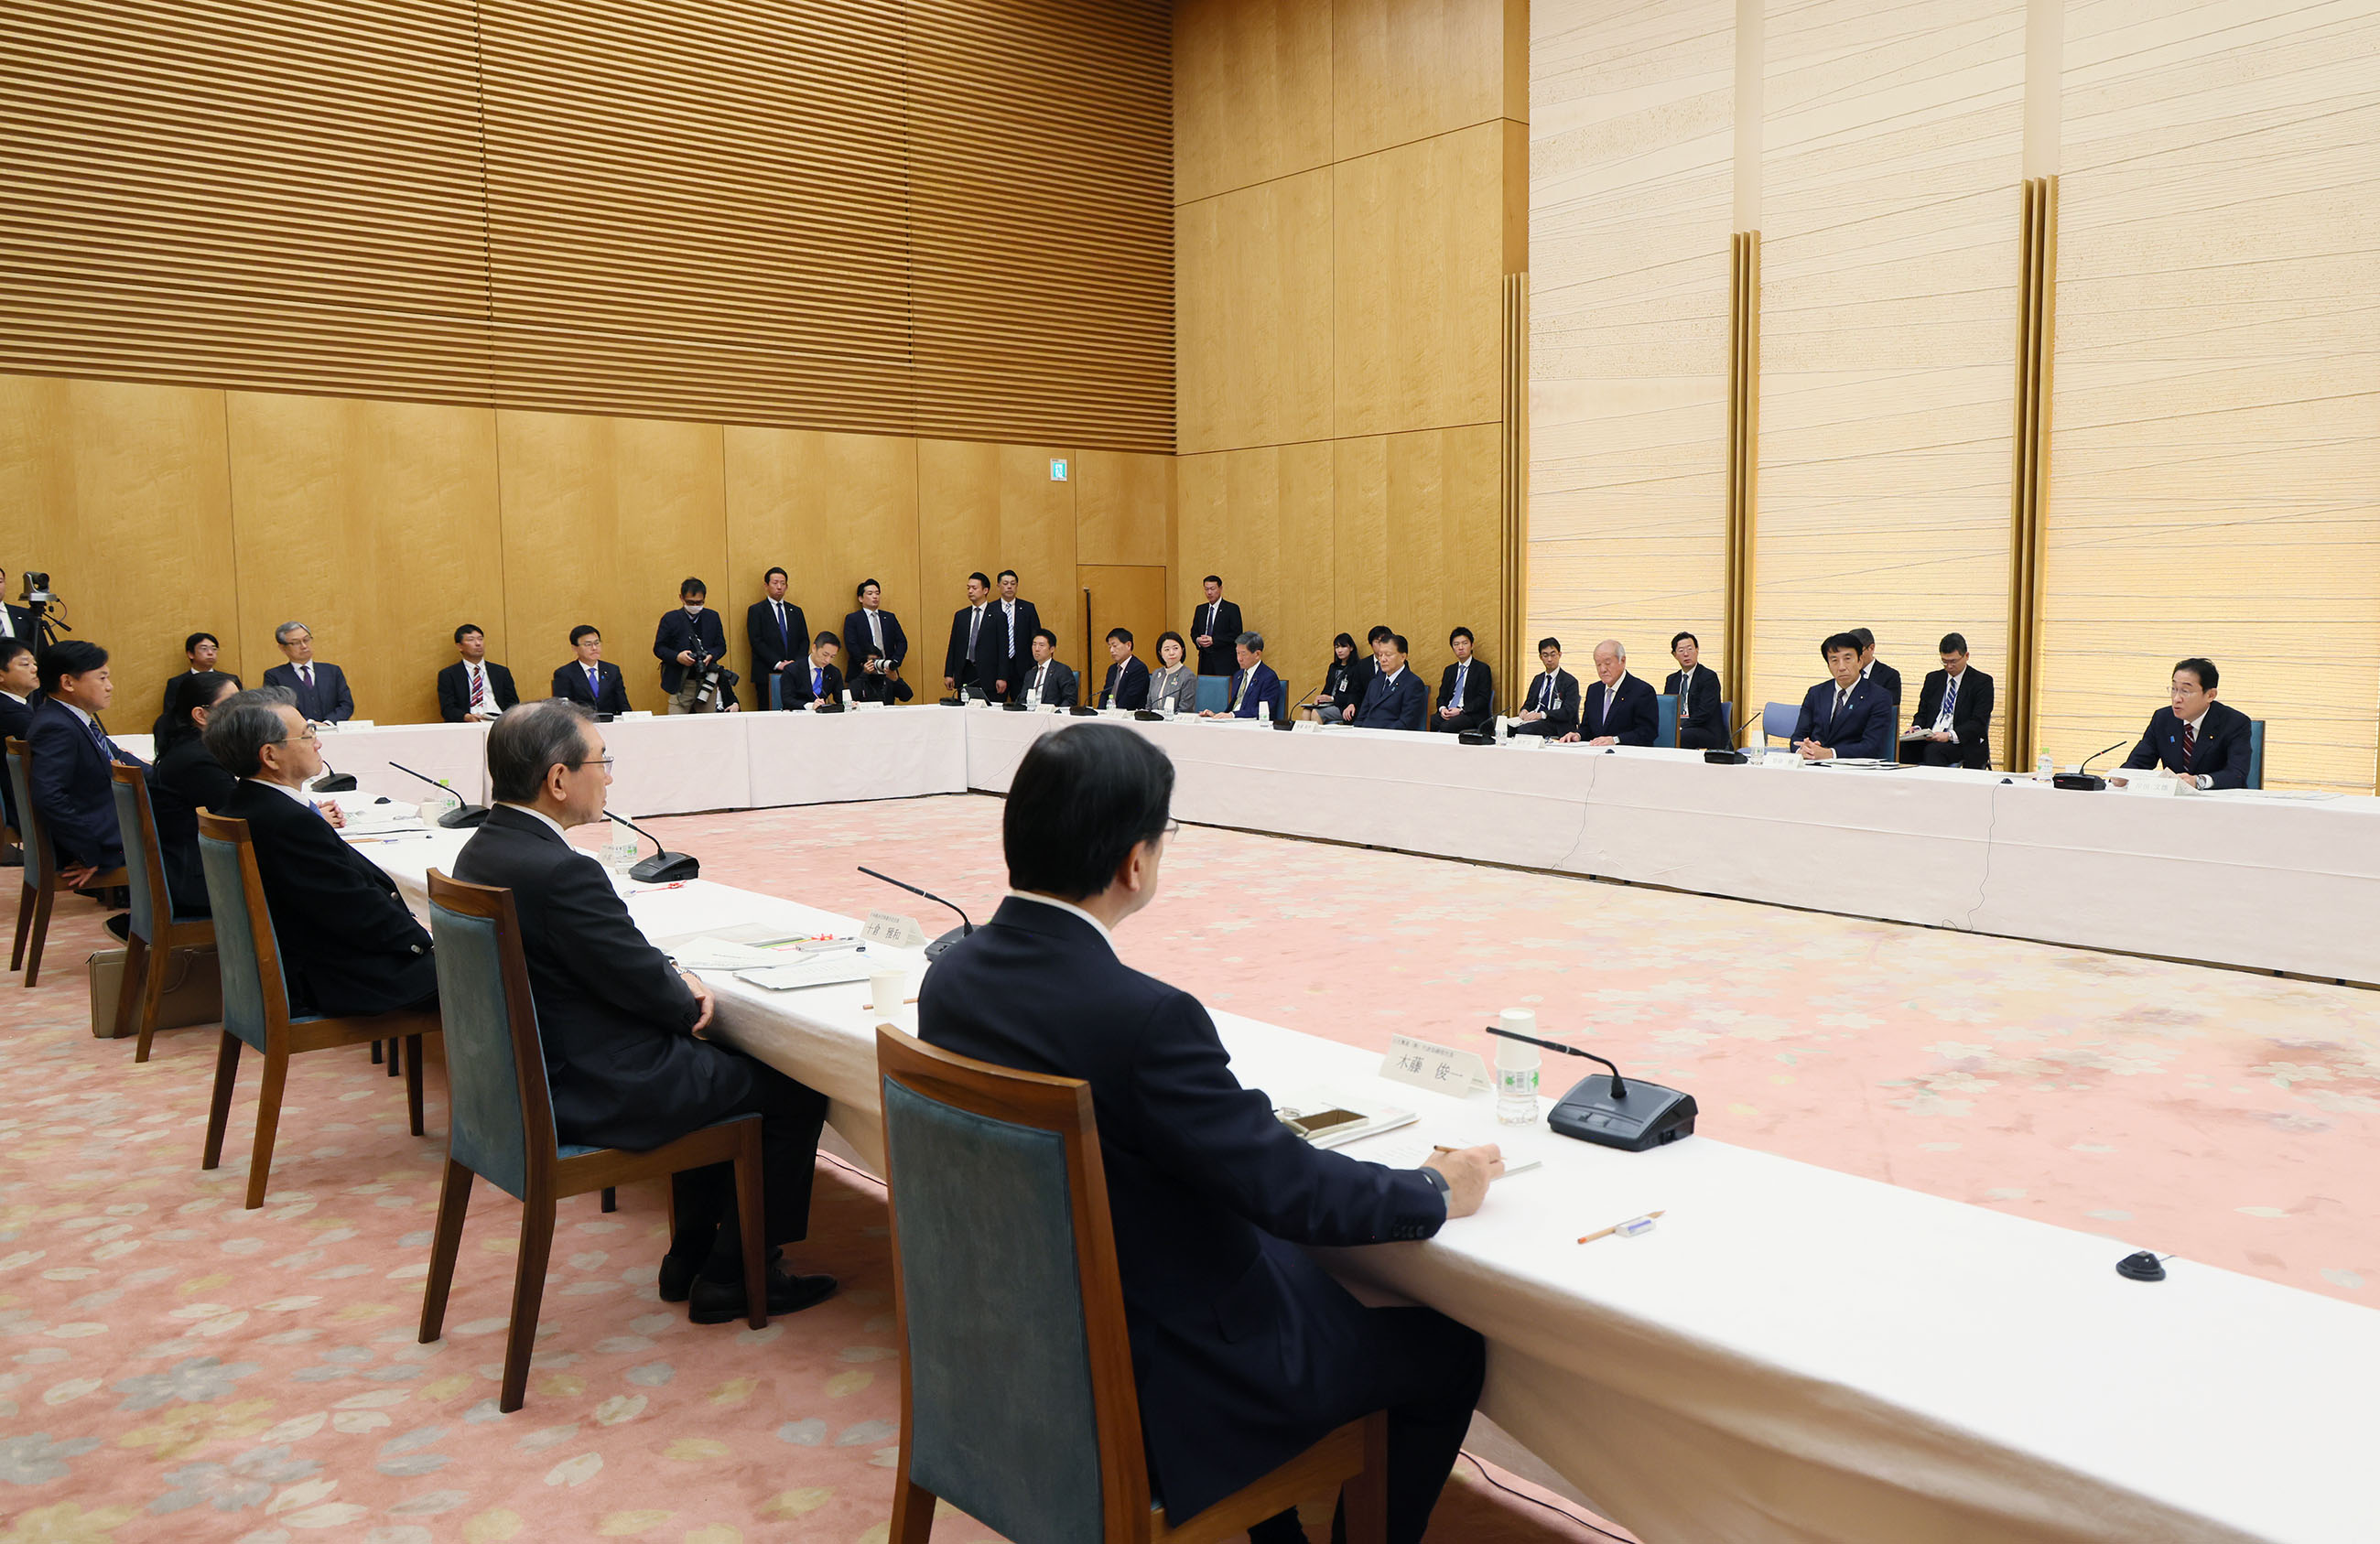 Prime Minister Kishida wrapping up the meeting (4)